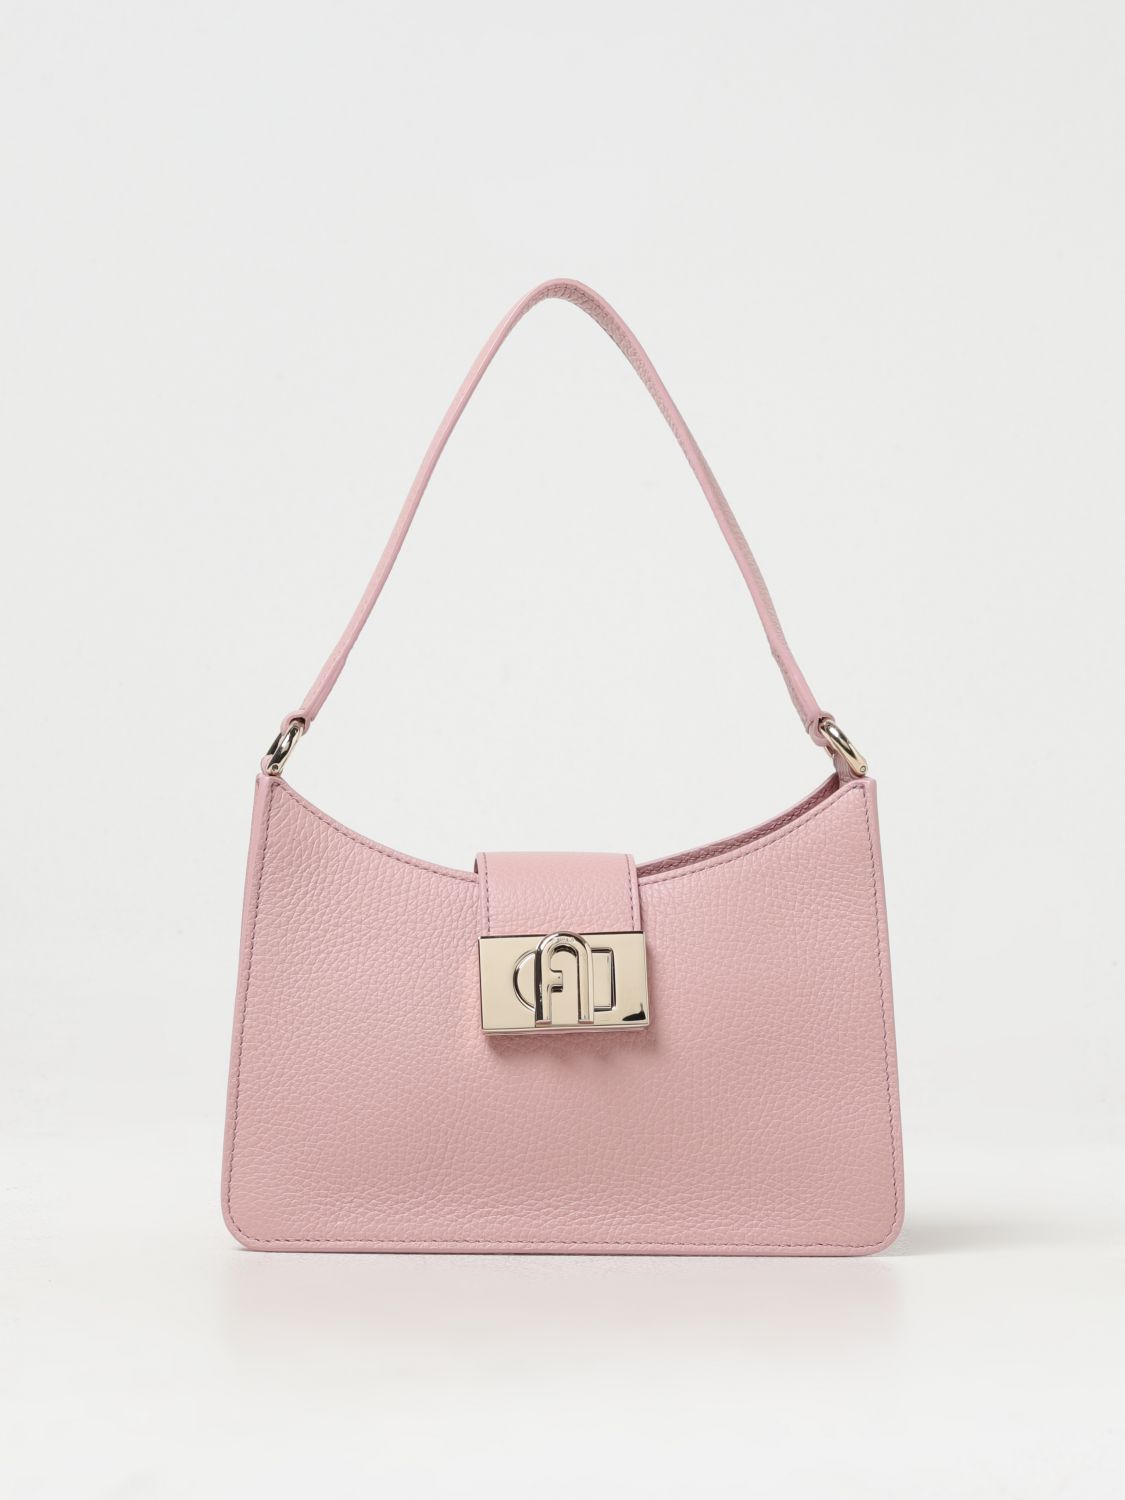 Furla 1927 Bag In Grained Leather In Pink